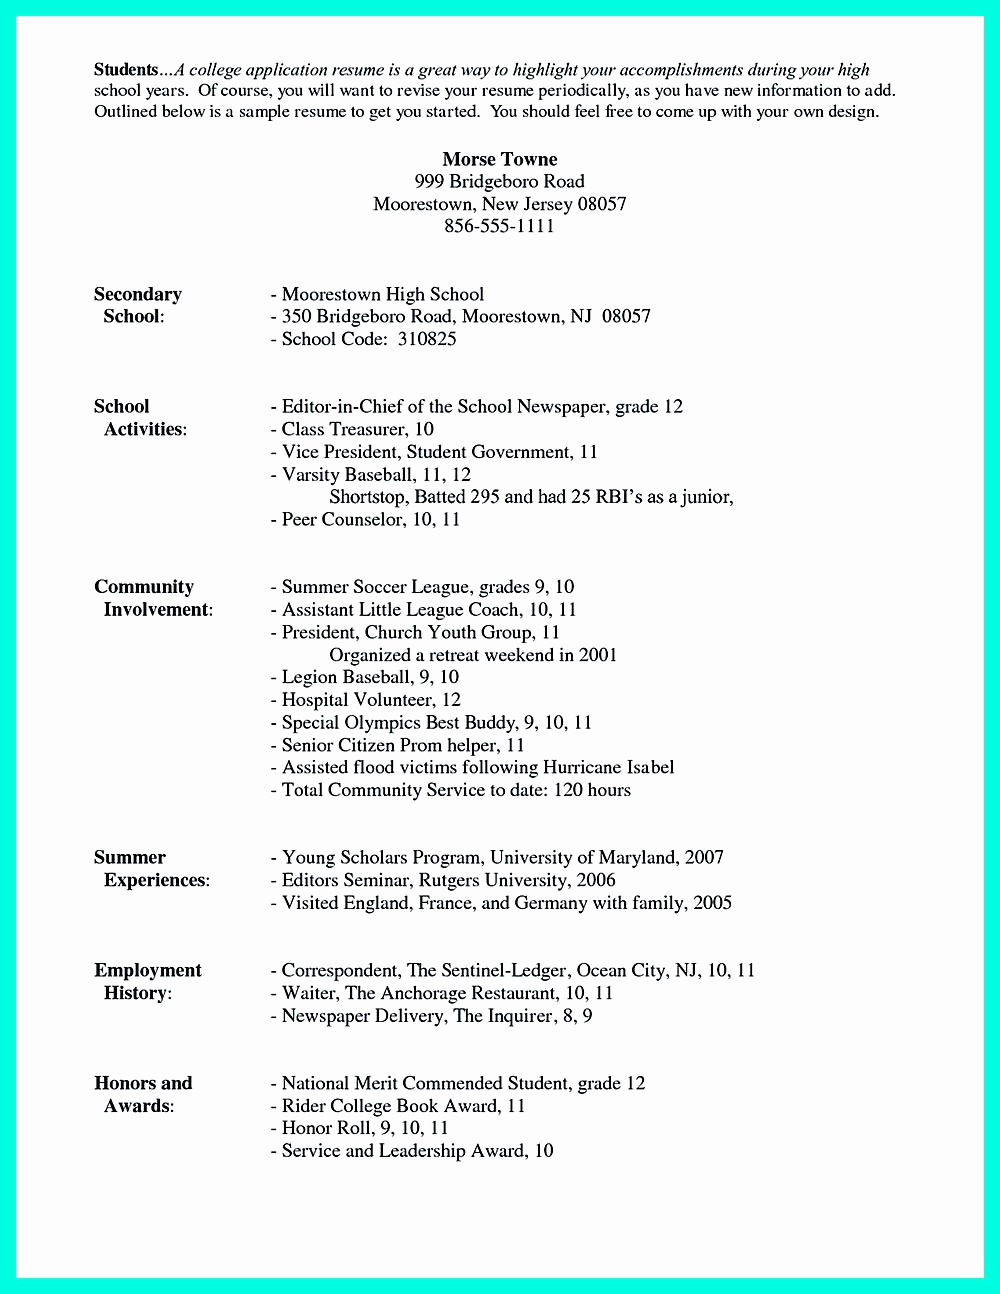 College Applicant Resume Template Lovely for High School Students It is sometimes Troublesome to